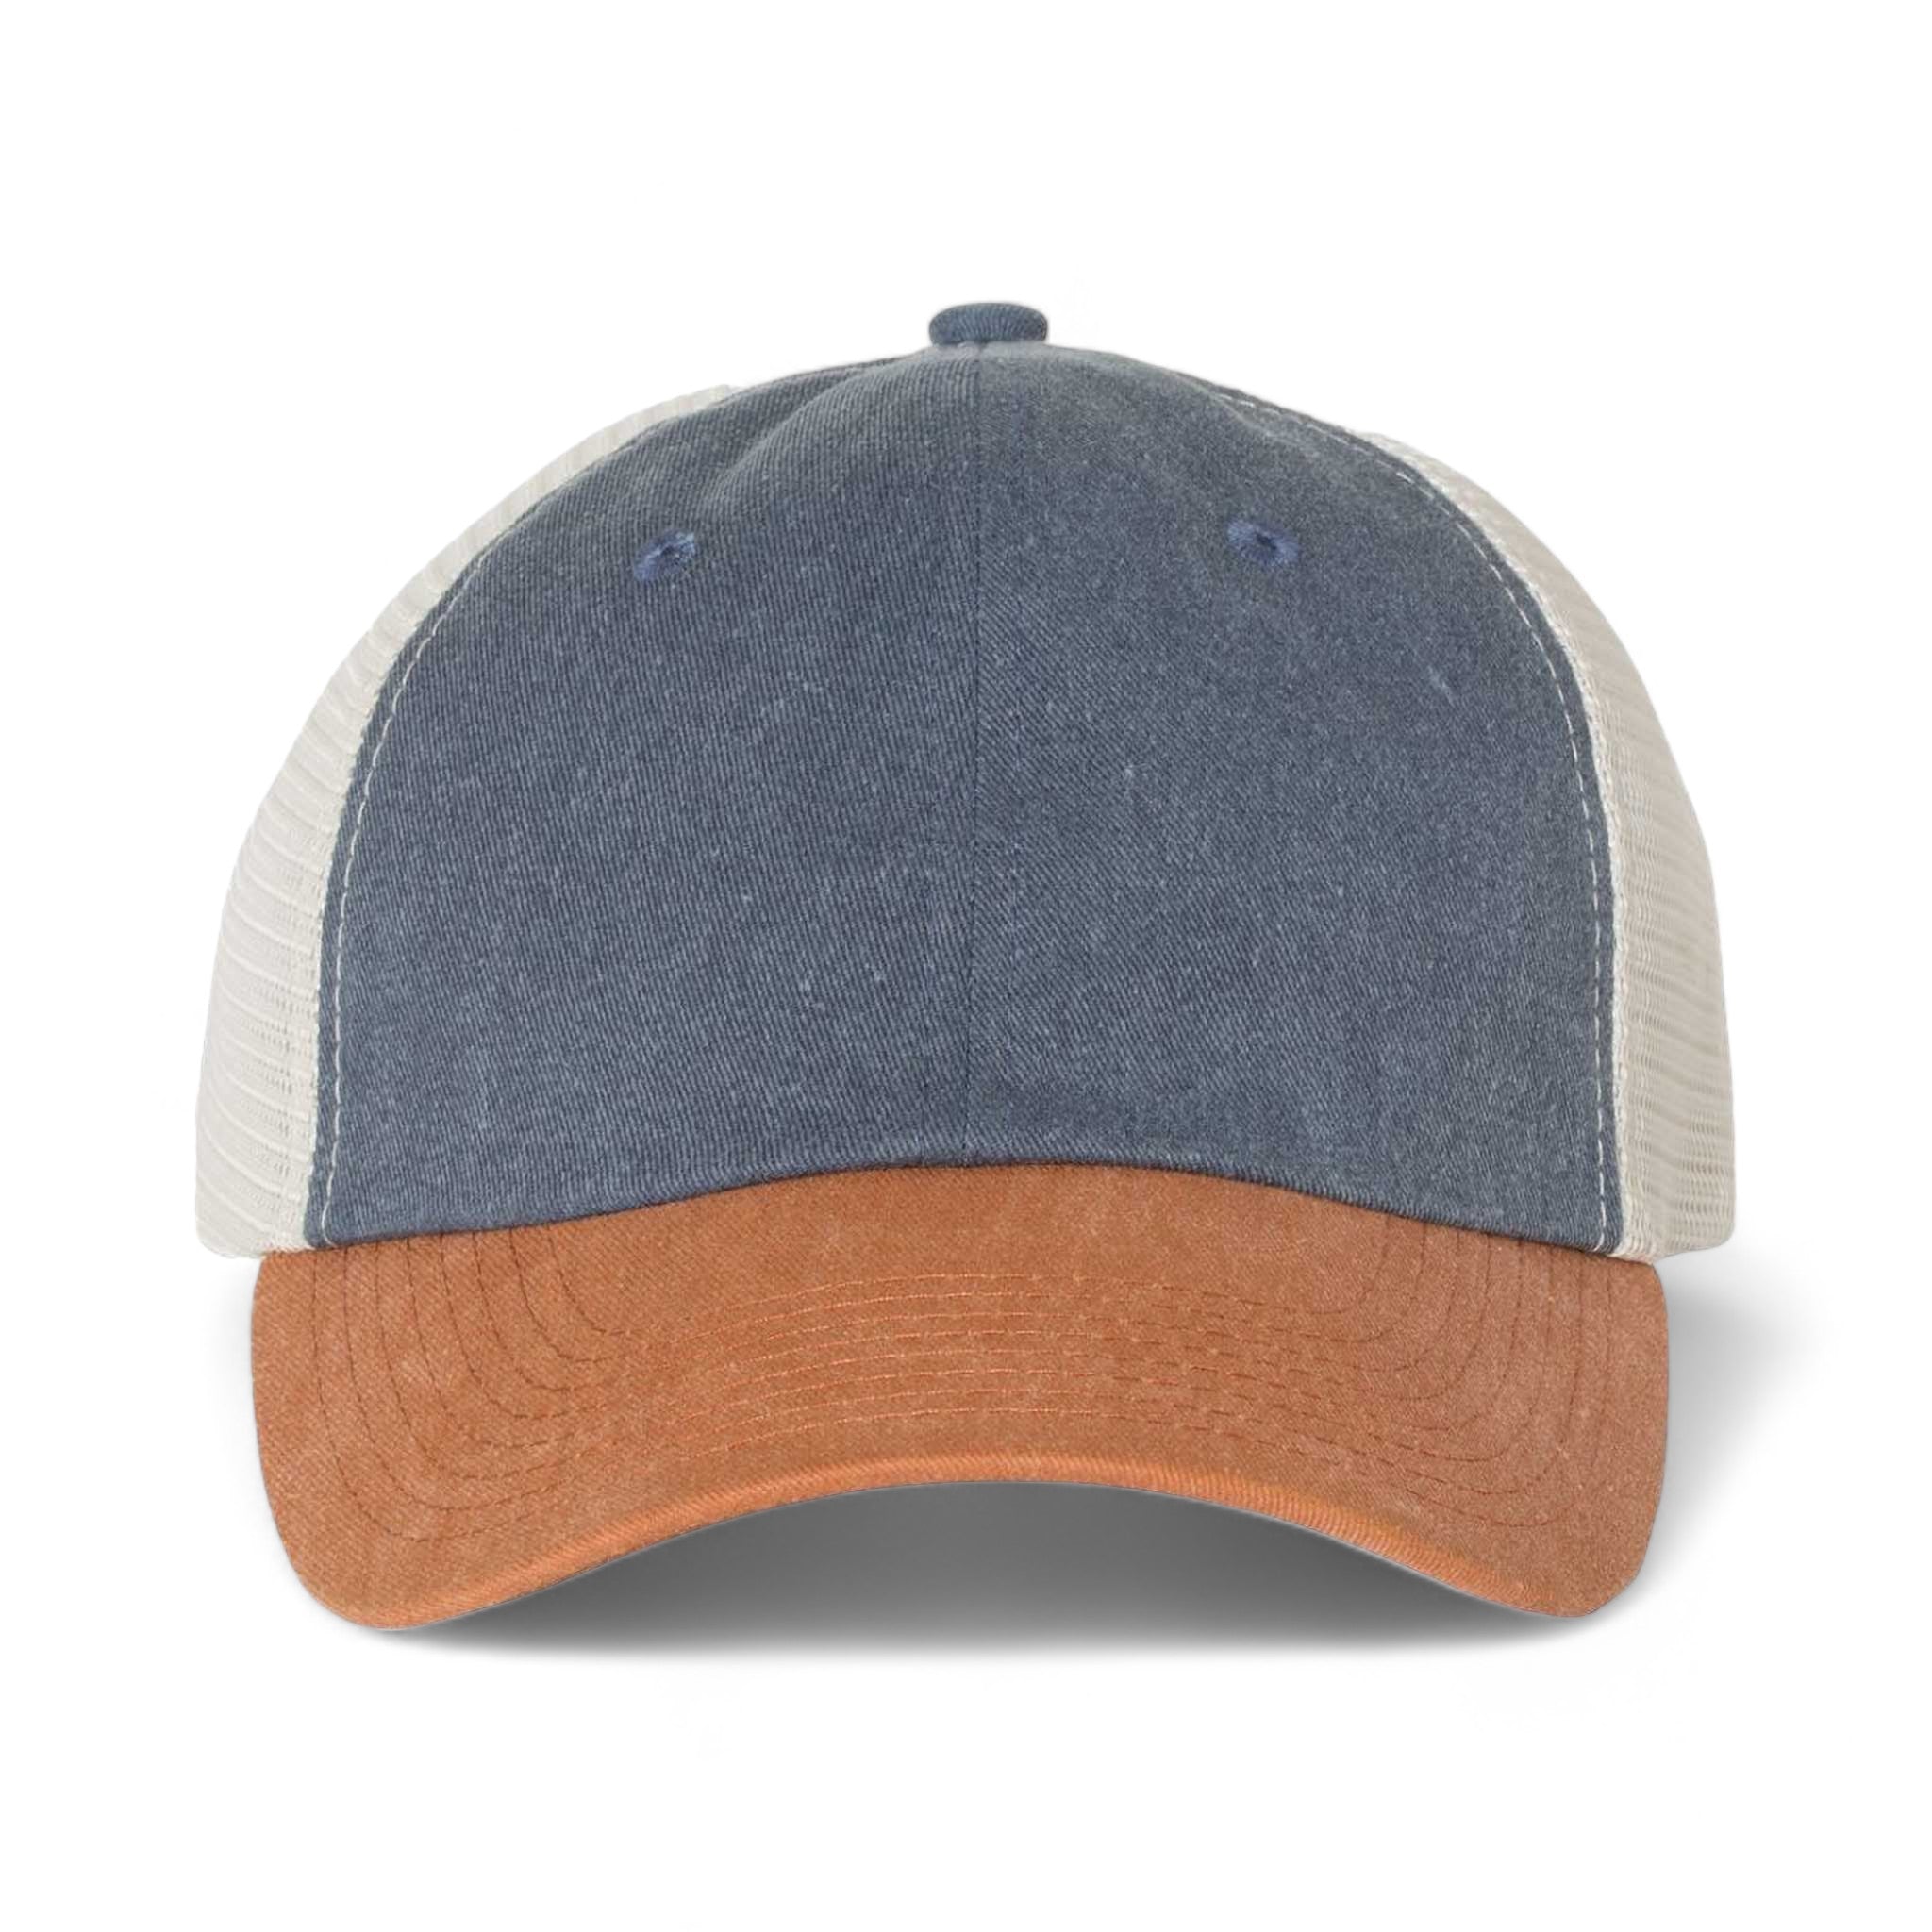 Front view of Sportsman SP510 custom hat in navy, texas and stone